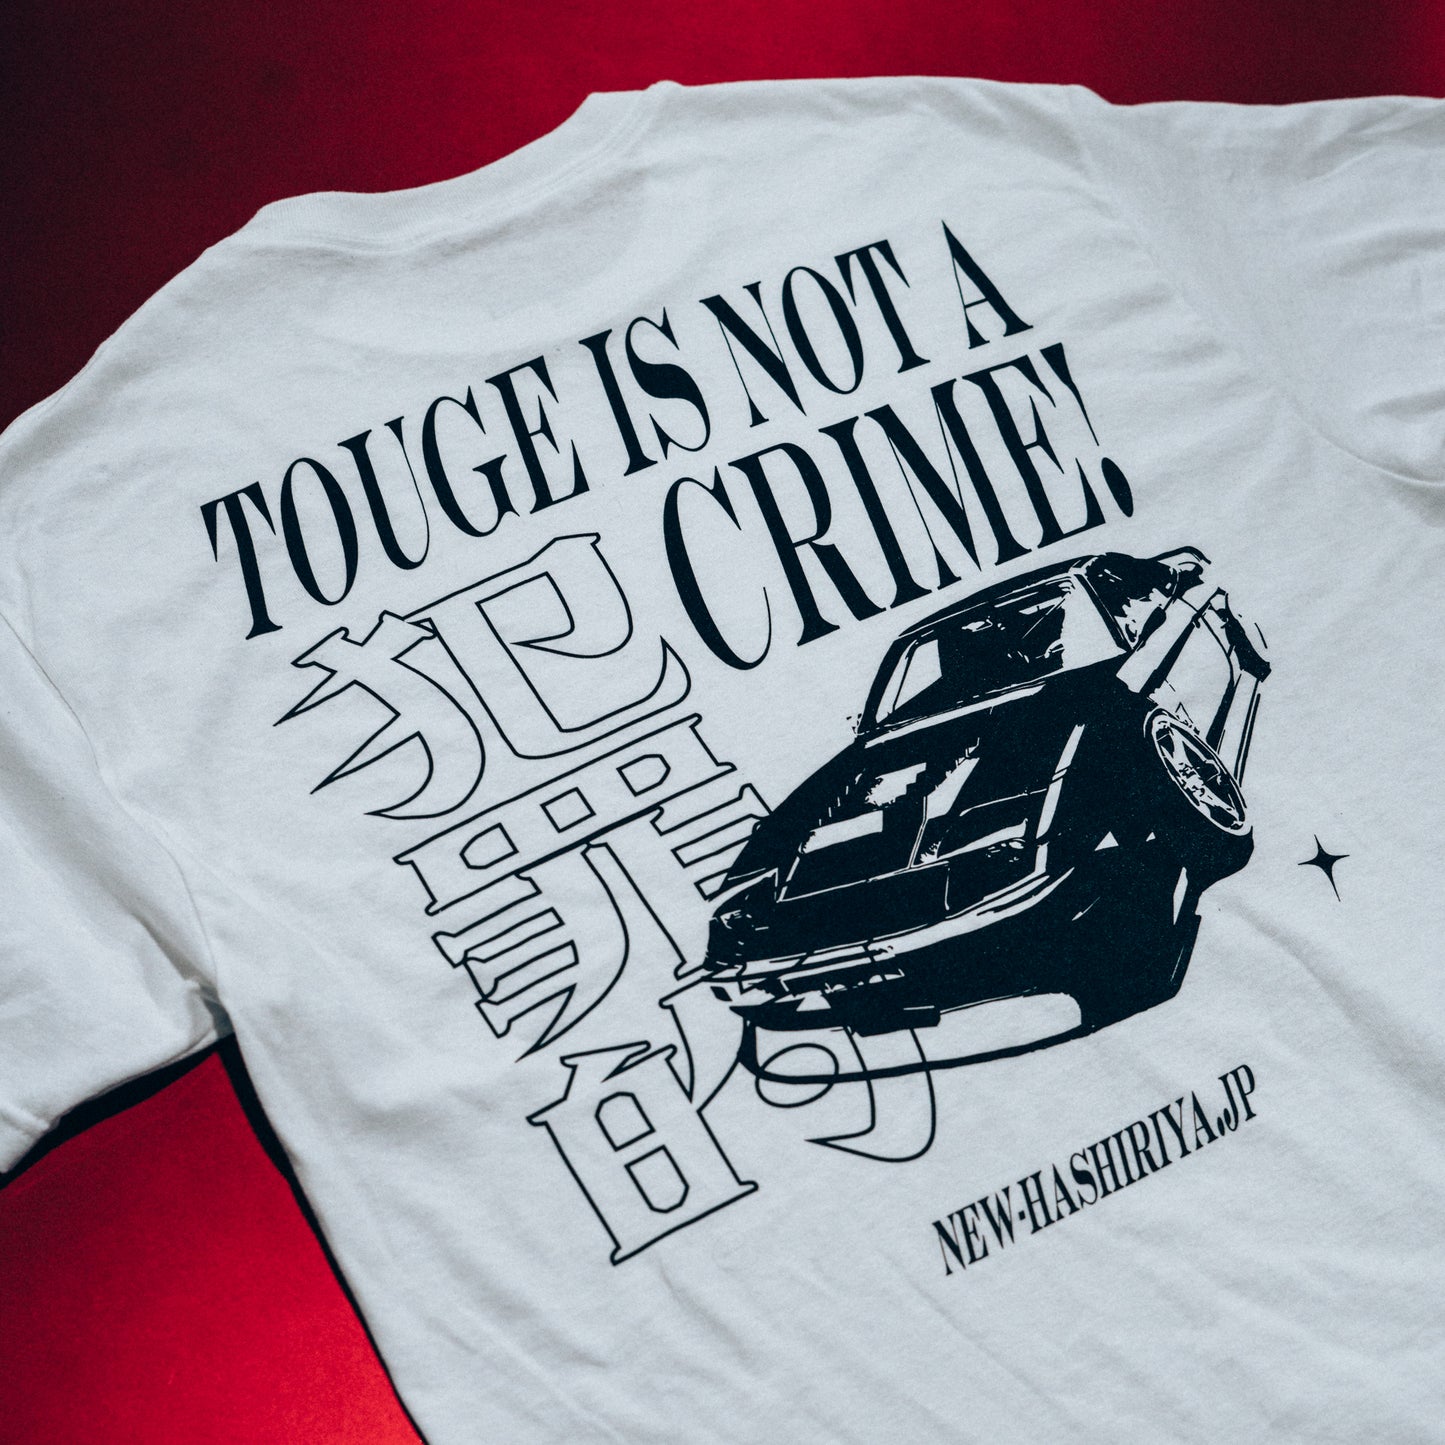 [𝙎𝙊𝙇𝘿 𝙊𝙐𝙏] 'Touge is not a crime' Tee